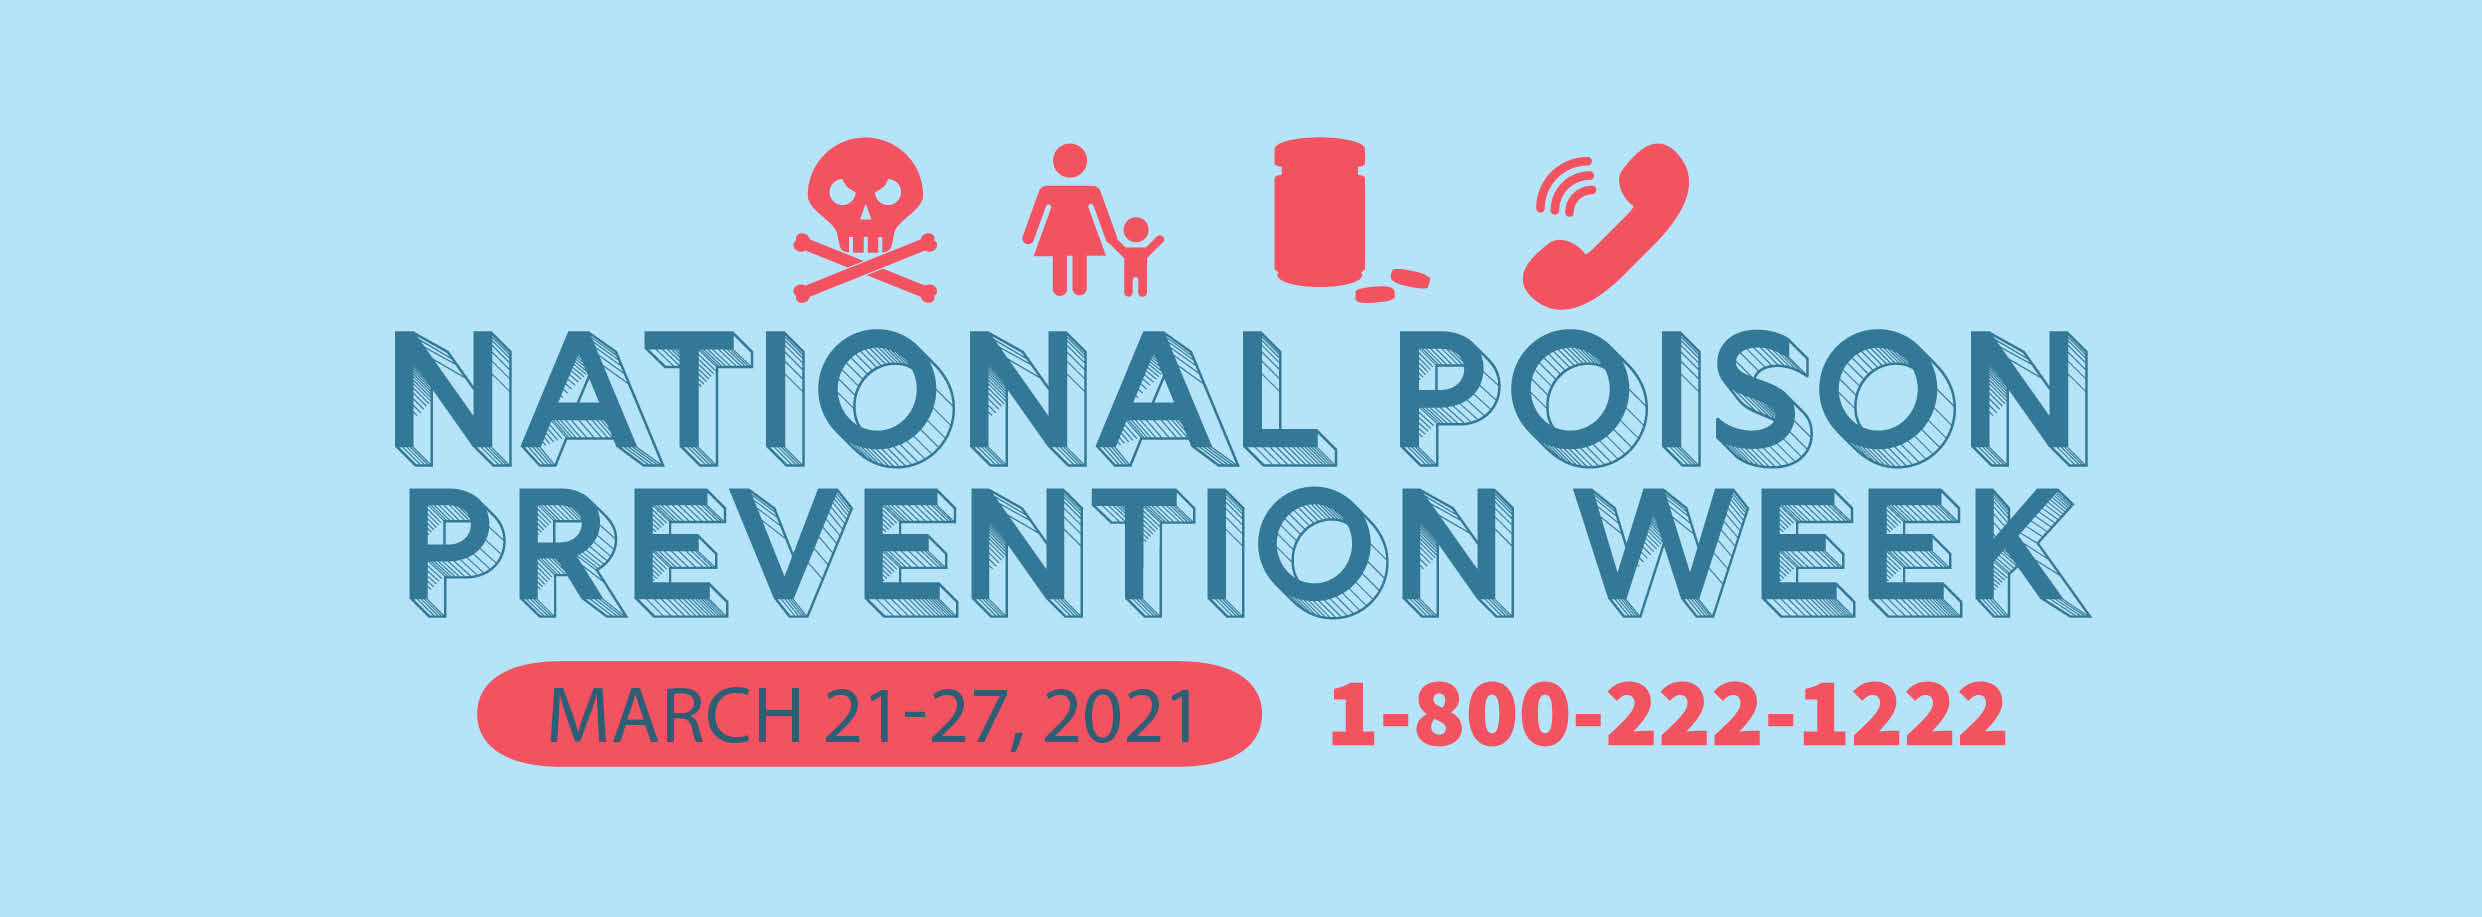 1015-NPPW 2021 header for FB